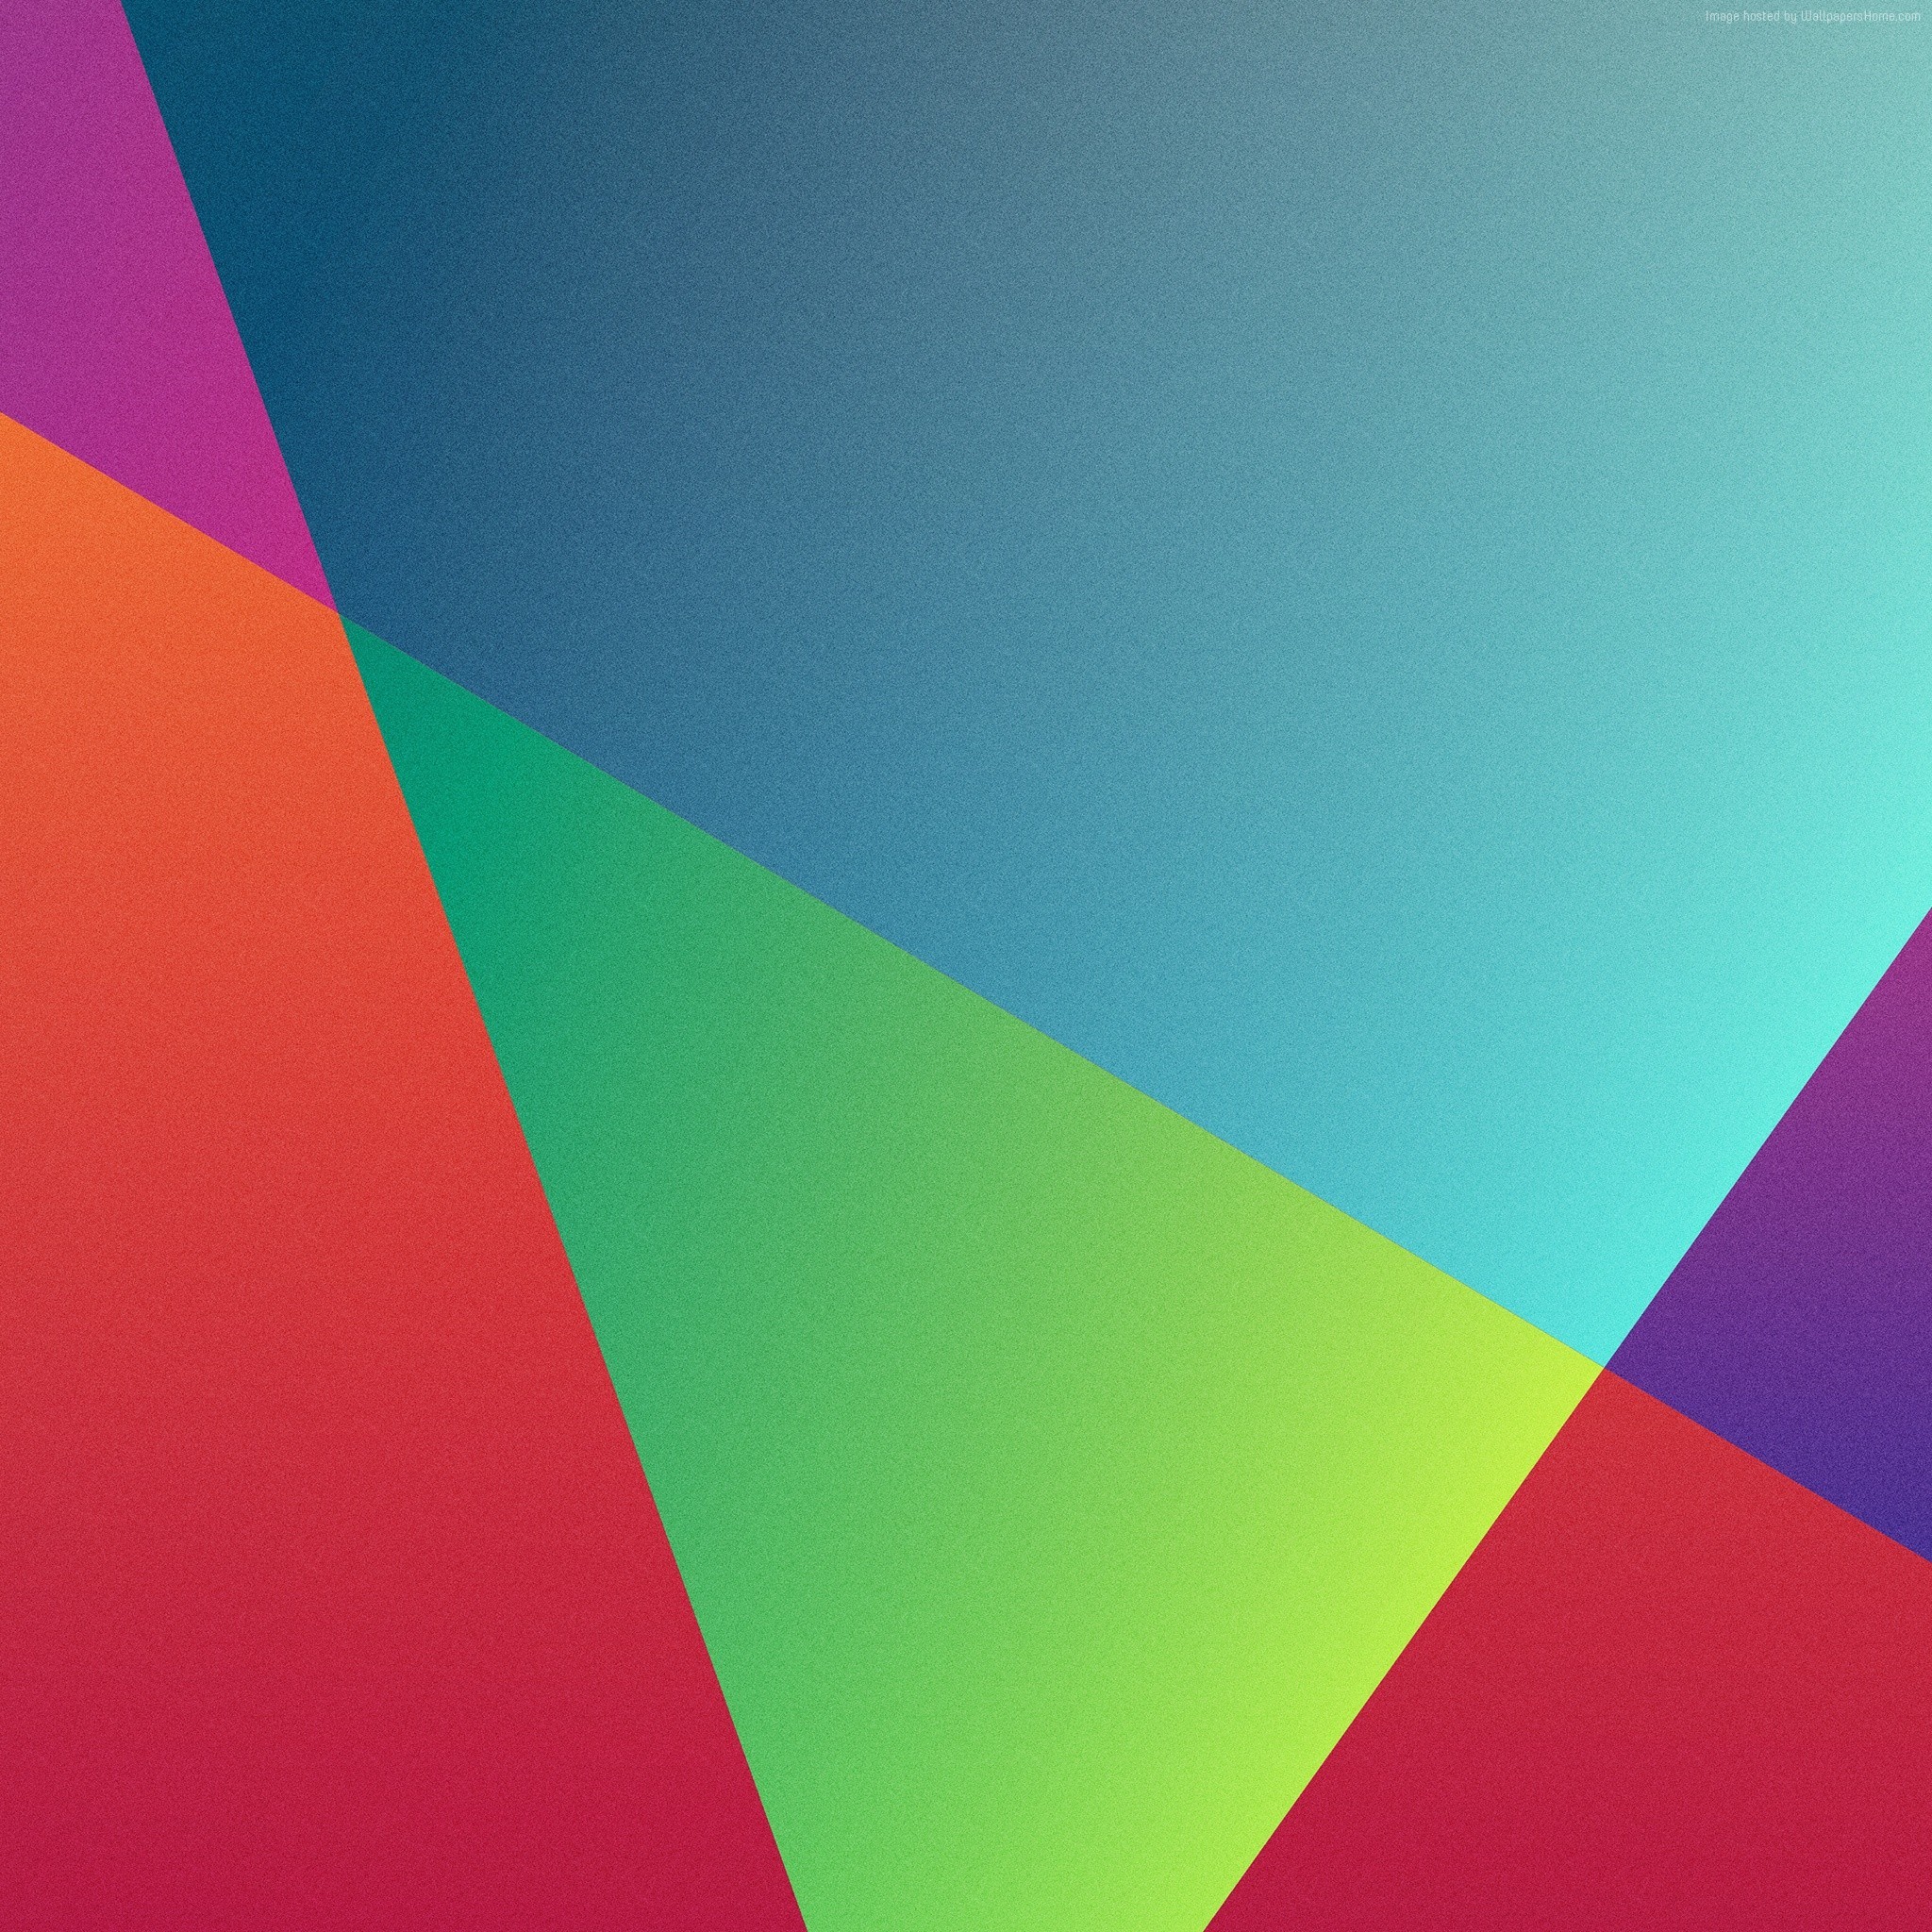 blue, orange, 4k, background, HD wallpaper, android wallpaper, triangle, red, pattern, polygon Gallery HD Wallpaper